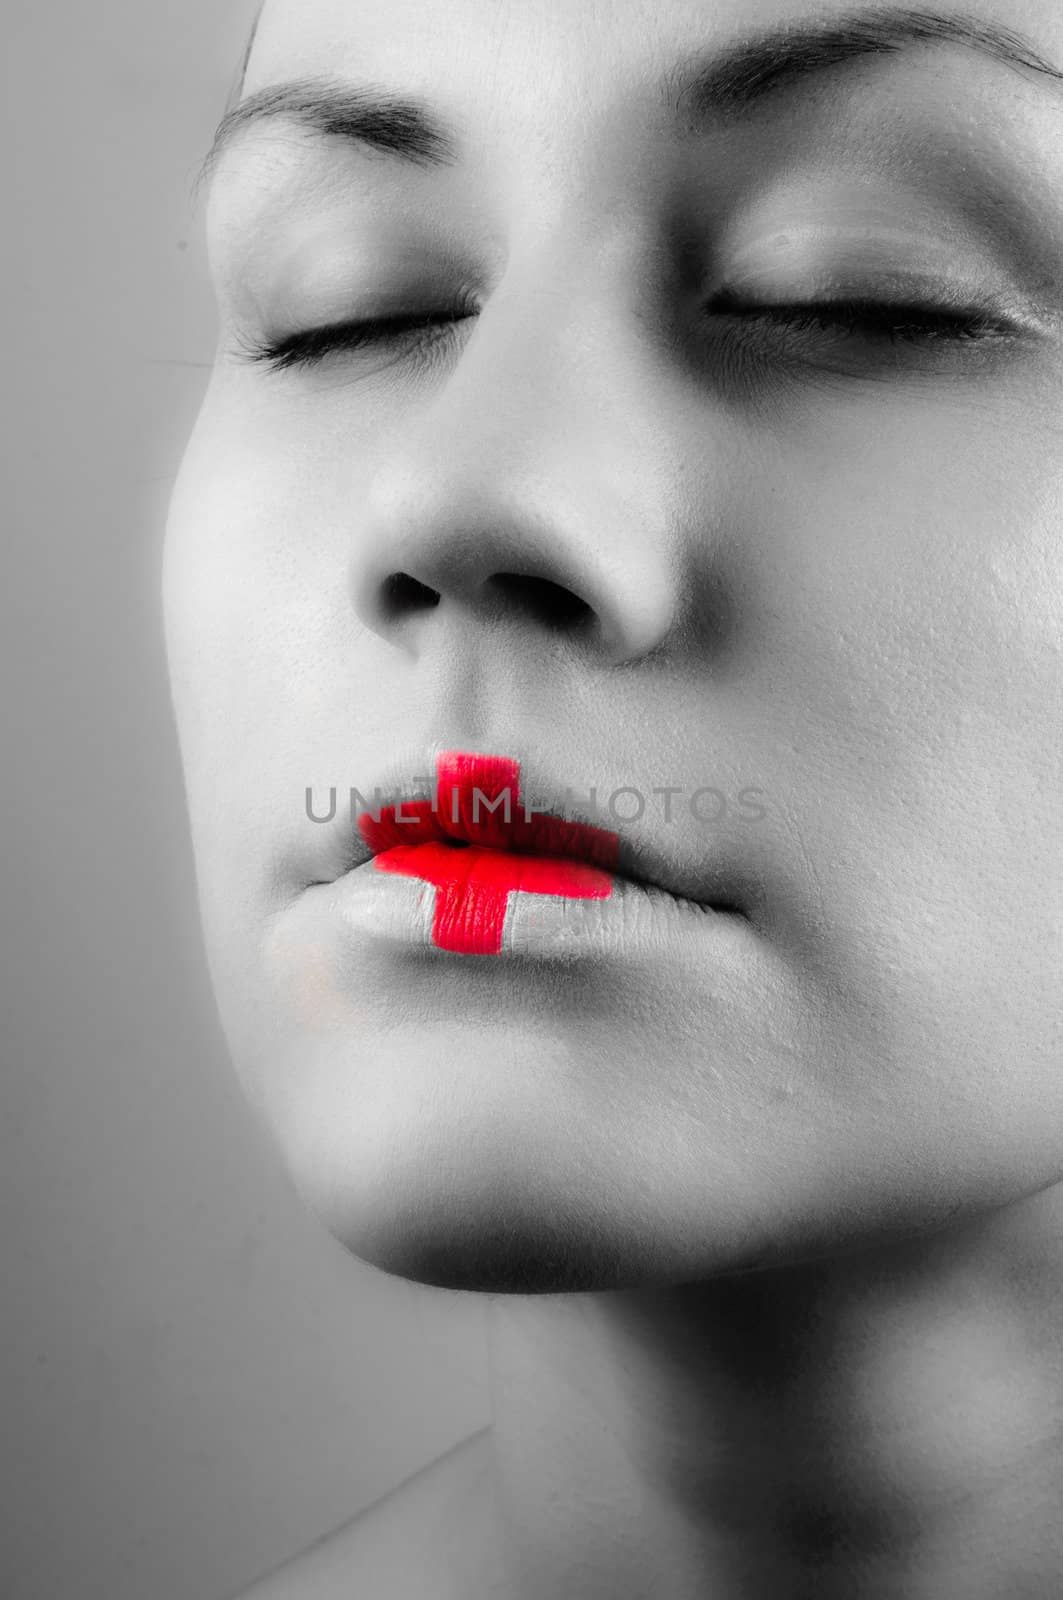 Black and white ohoto of a girl with medical lipstick by svedoliver